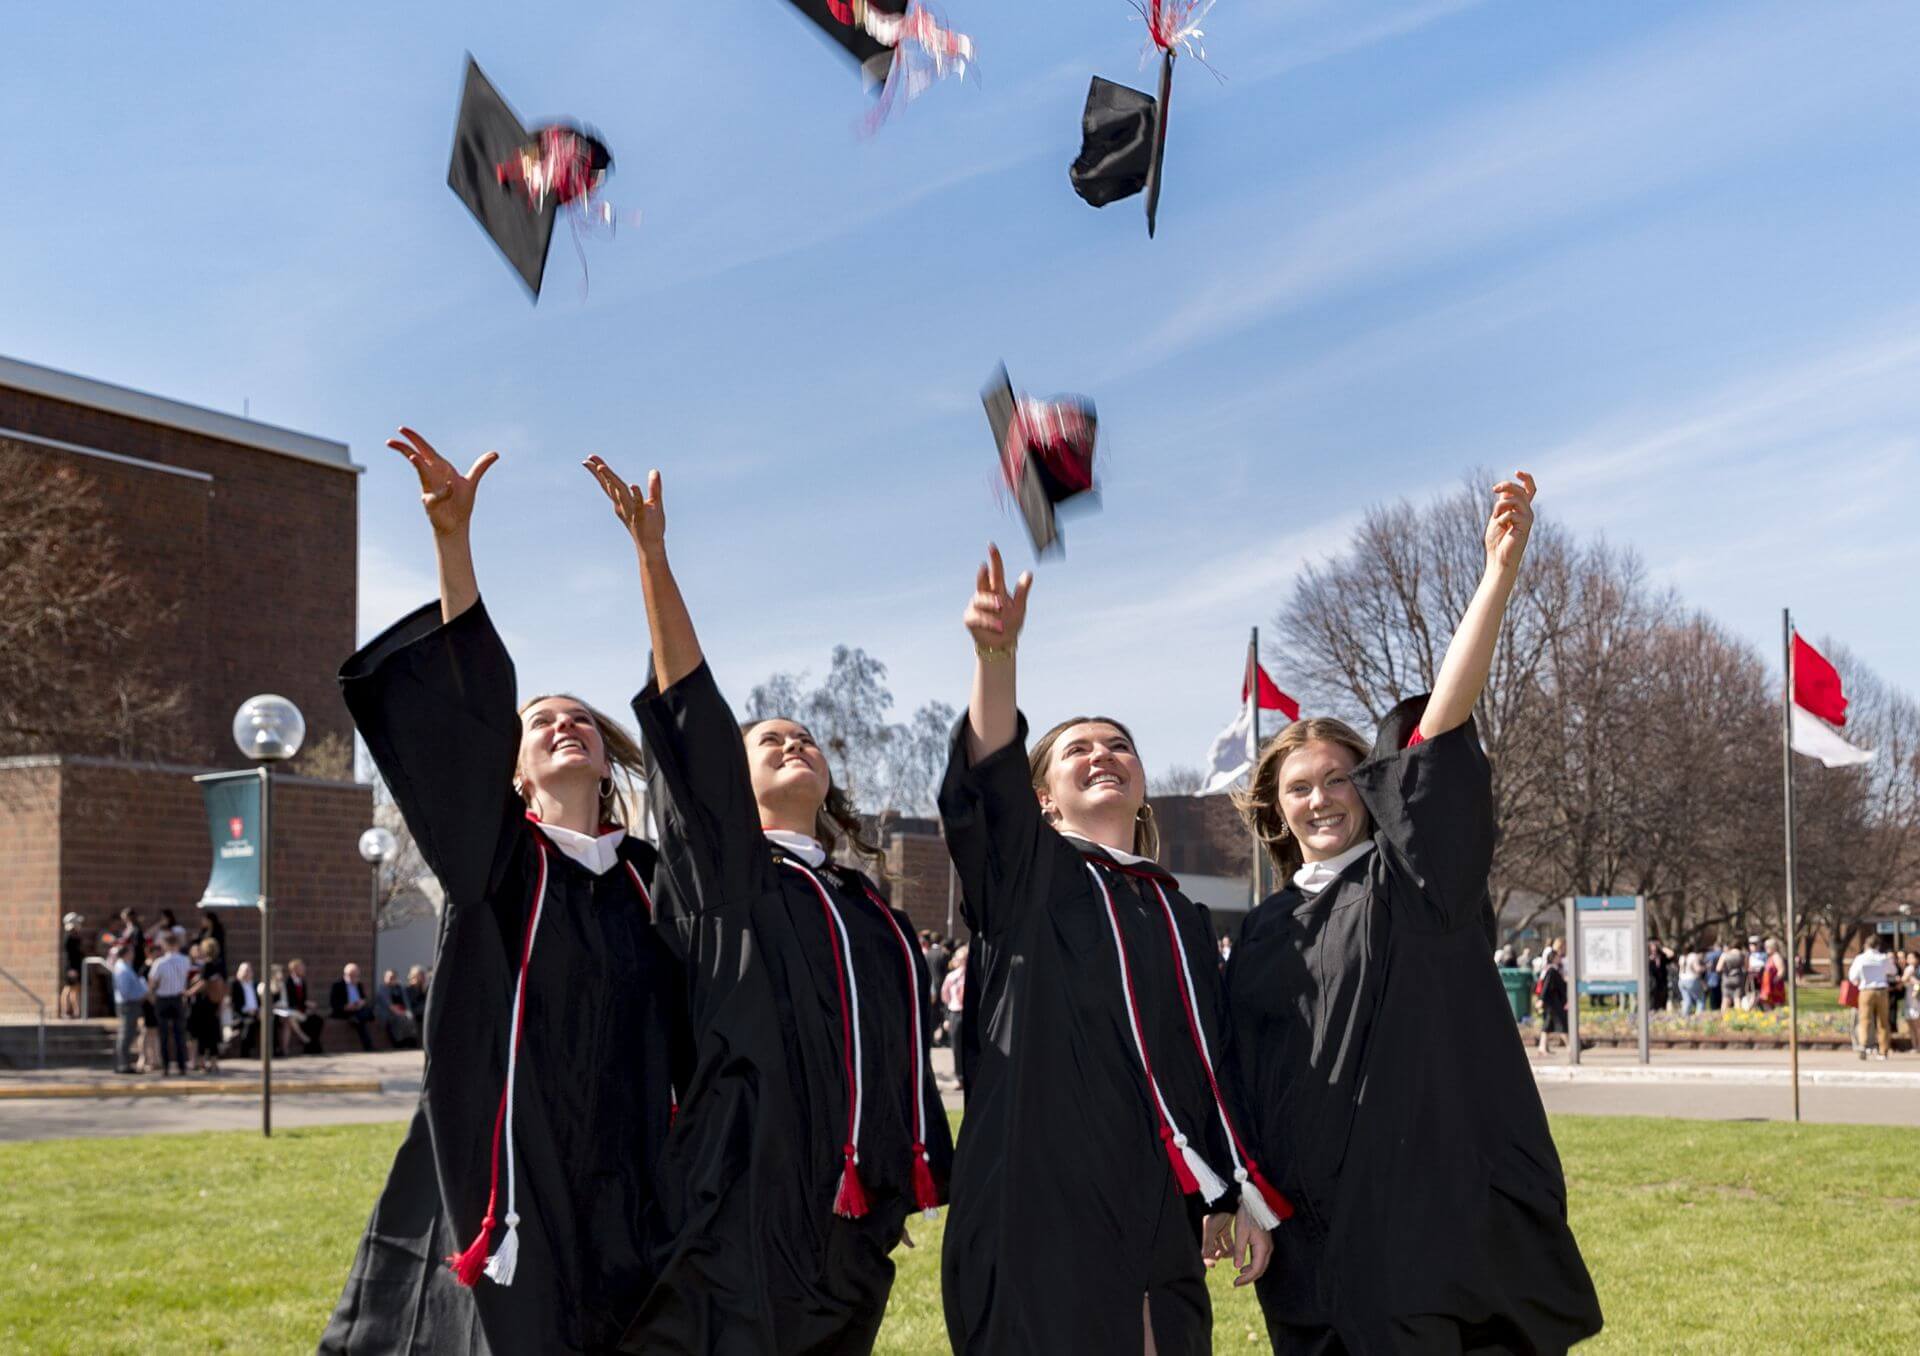 A group of women in graduation gowns throwing caps in the air.